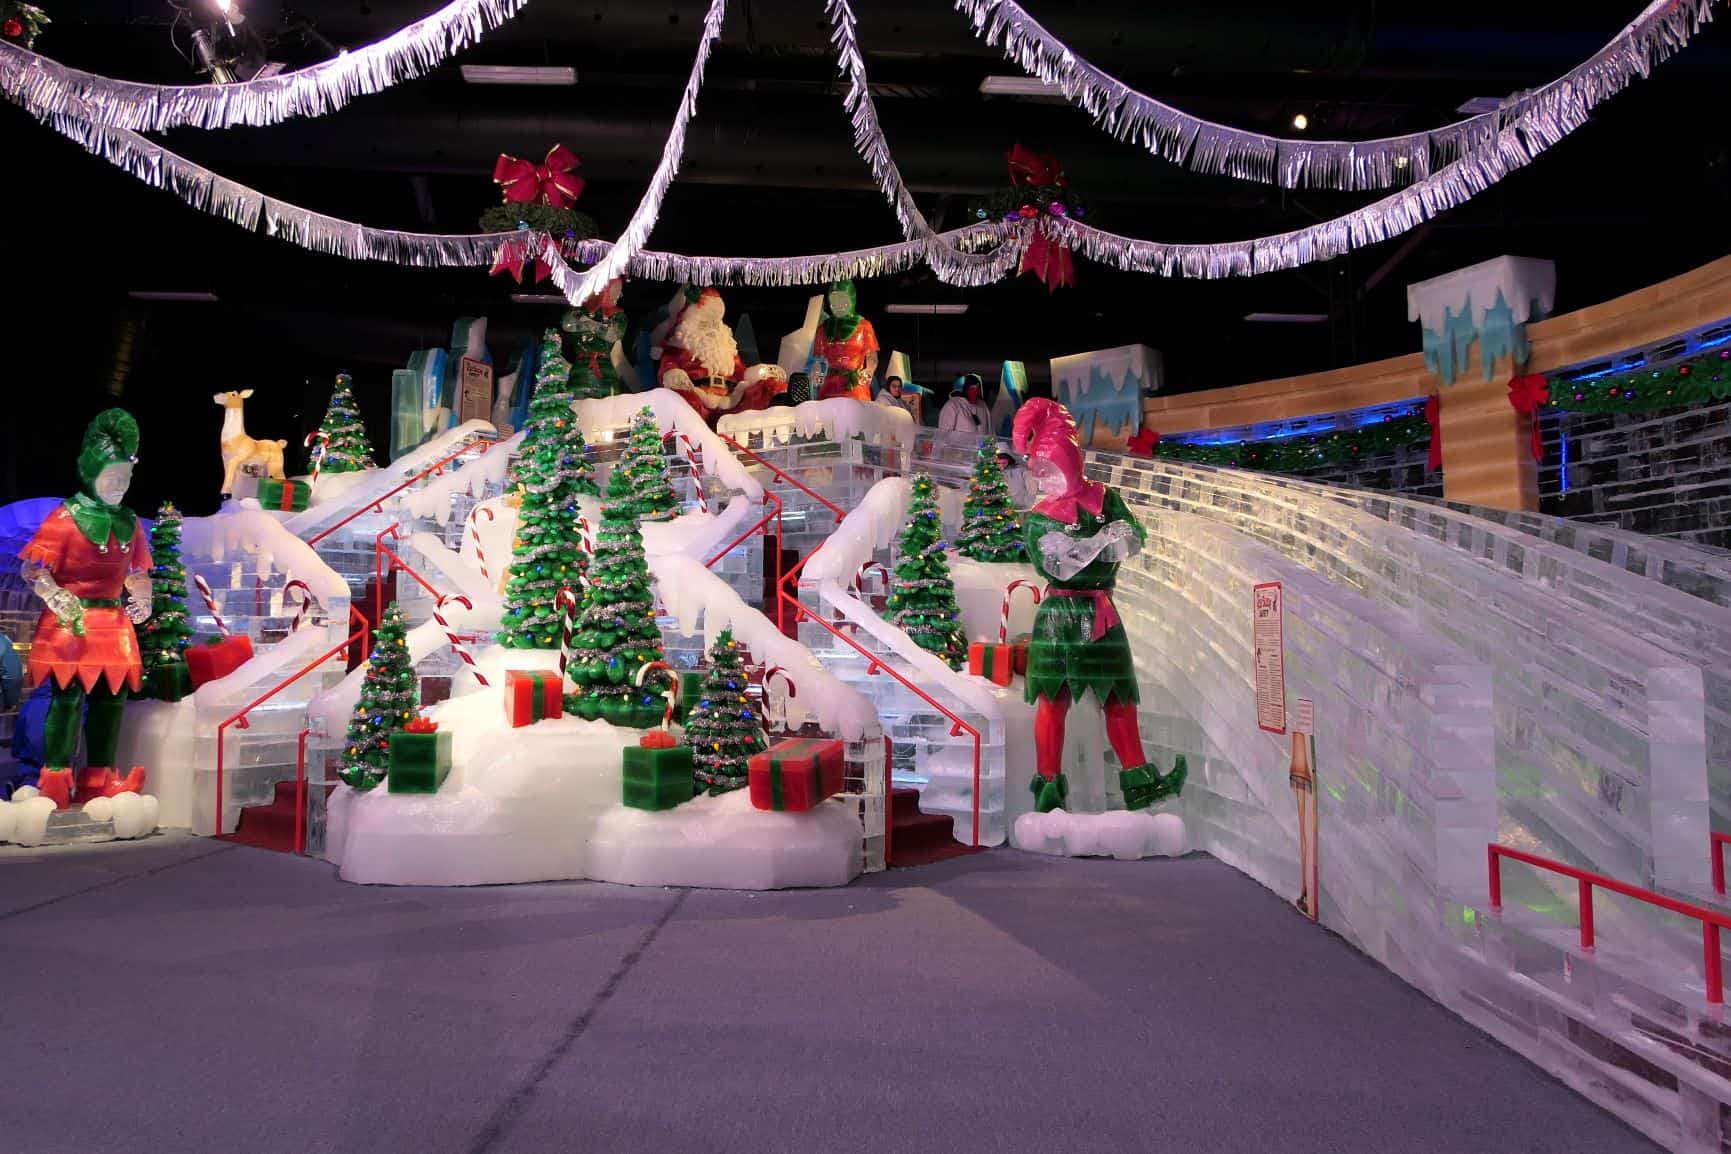 2019 ICE! Gaylord Opryland "A Christmas Story" Christmas in Nashville